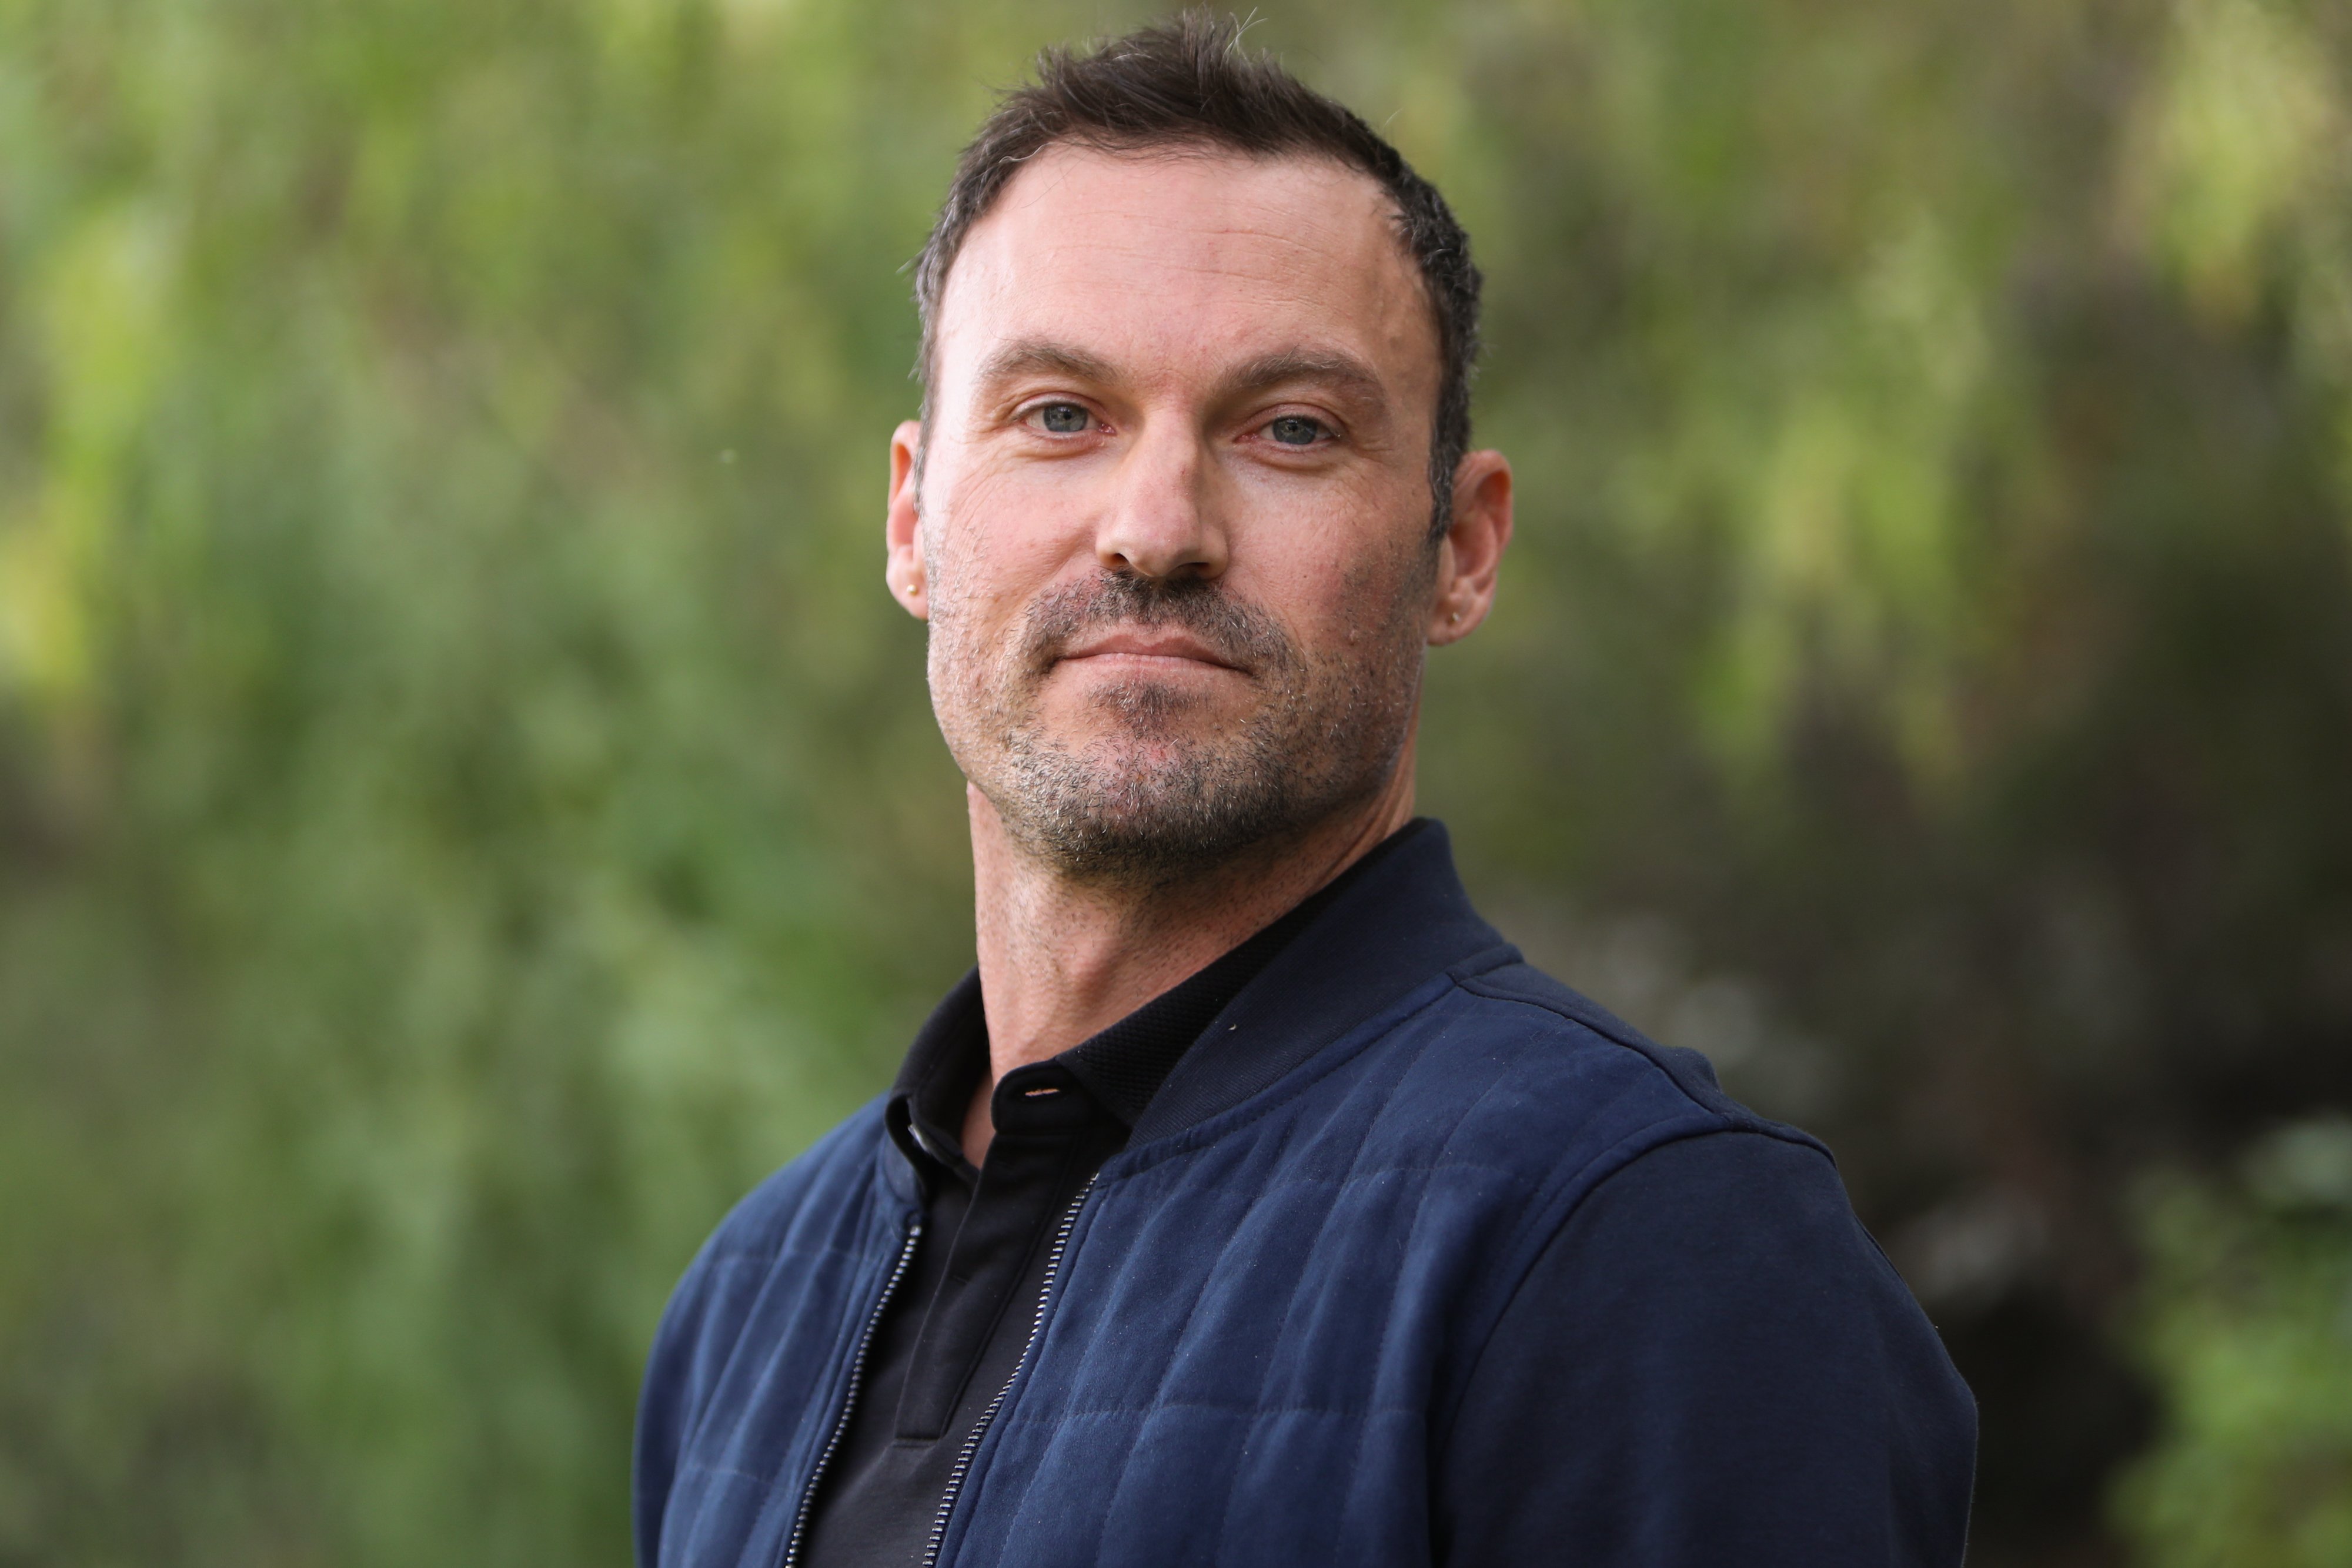 Brian Austin Green visits Hallmark Channel's "Home & Family" at Universal Studios Hollywood on November 15, 2019 in Universal City, California | Photo: Getty Images